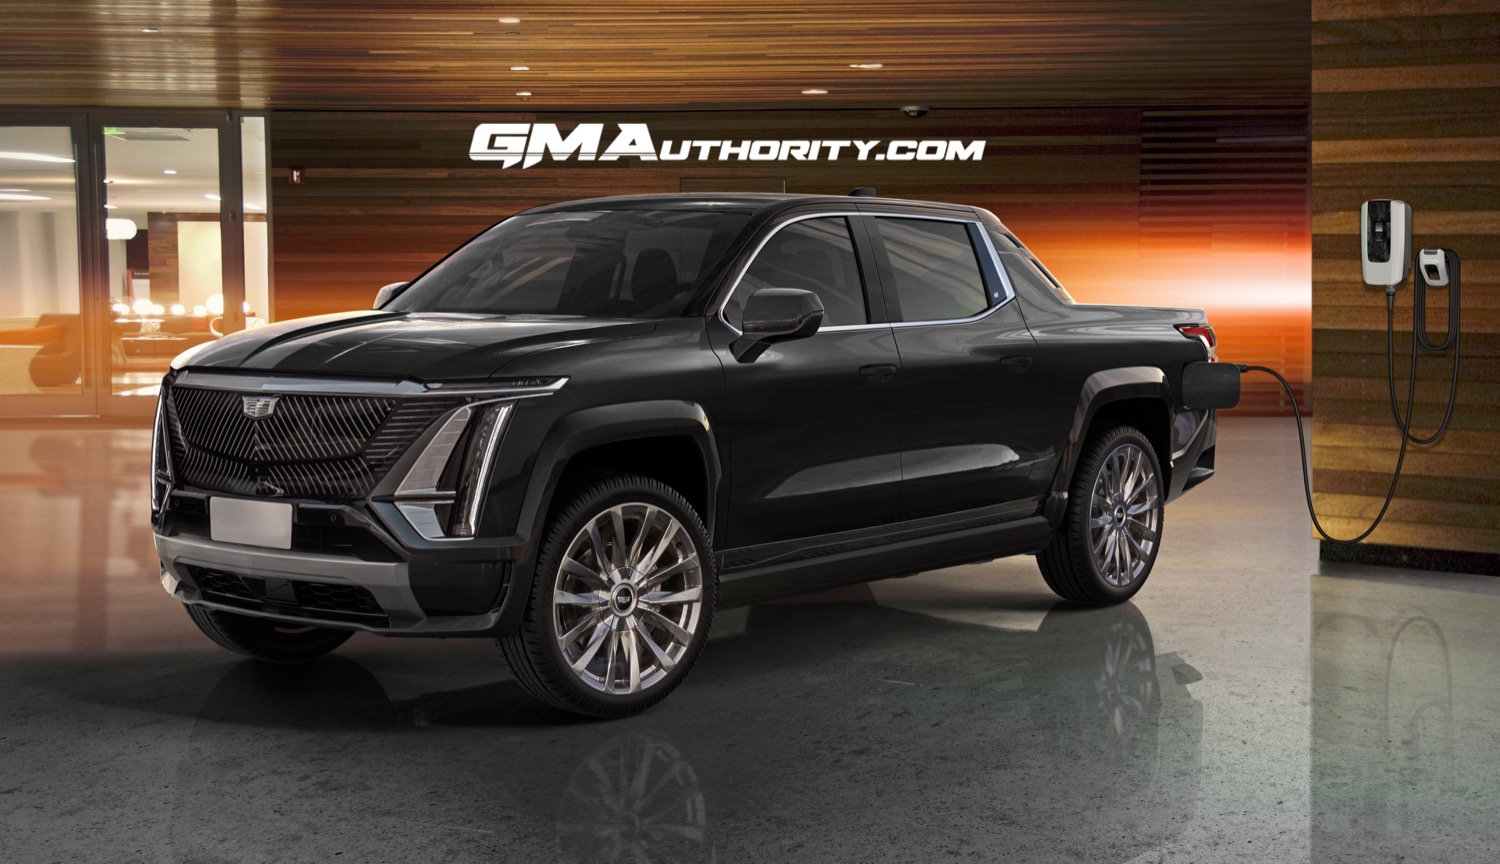 https://gmauthority.com/blog/wp-content/uploads/2022/03/Cadillac-EV-Electric-Pickup-Rendering-GM-Authority-001.jpg